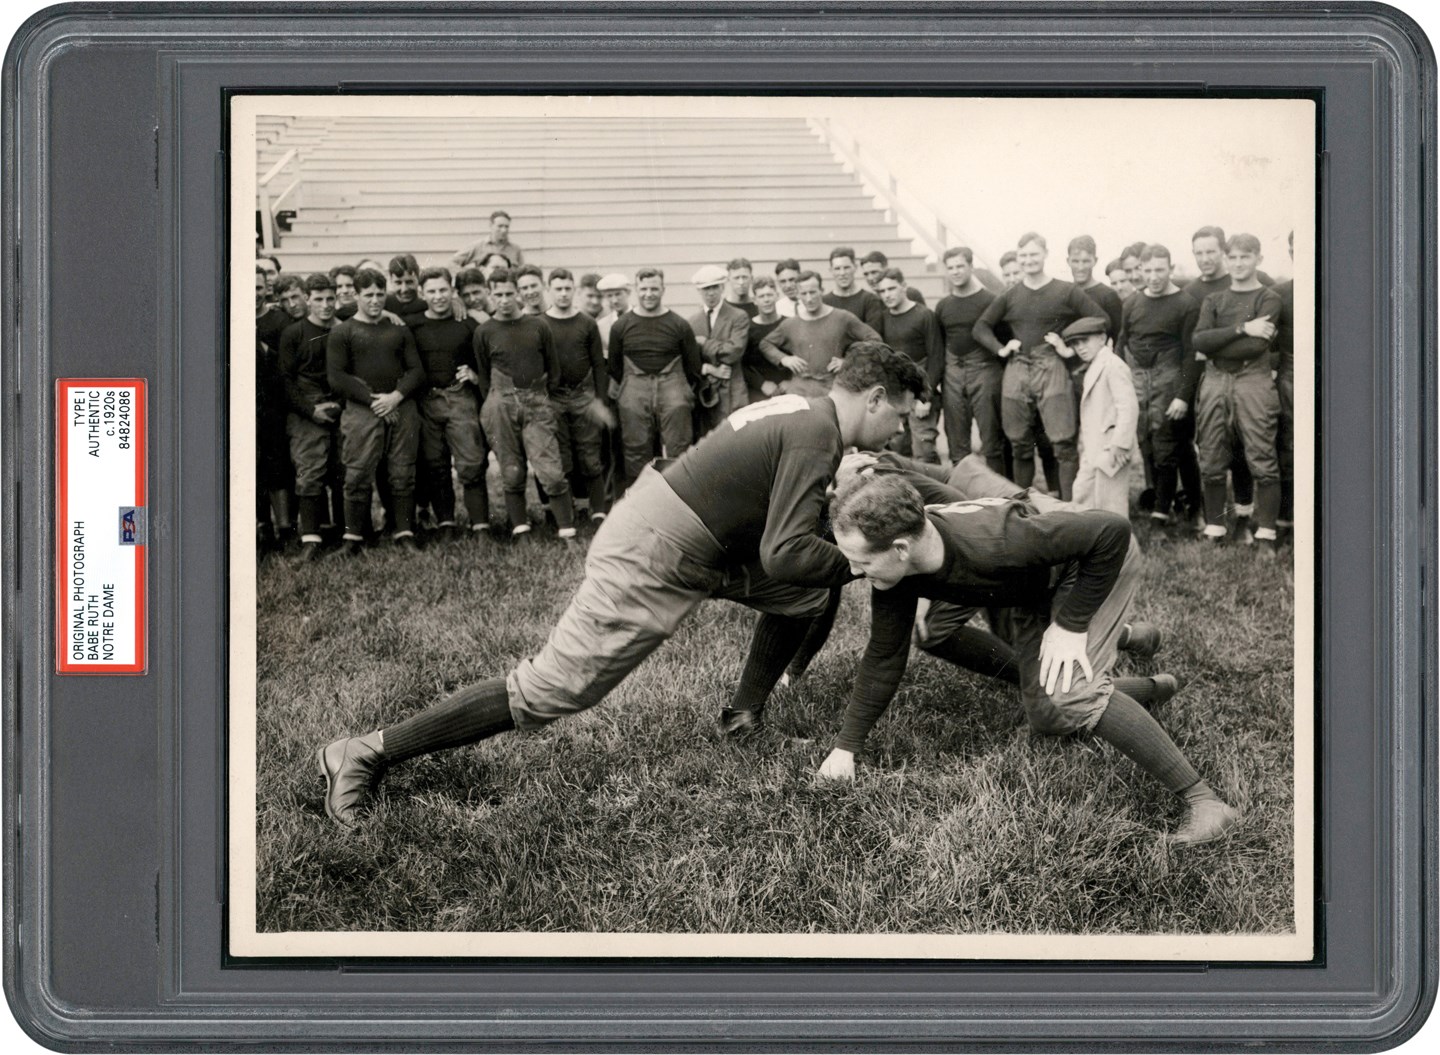 - Babe Ruth On the Gridiron at Notre Dame Photograph (PSA Type I)